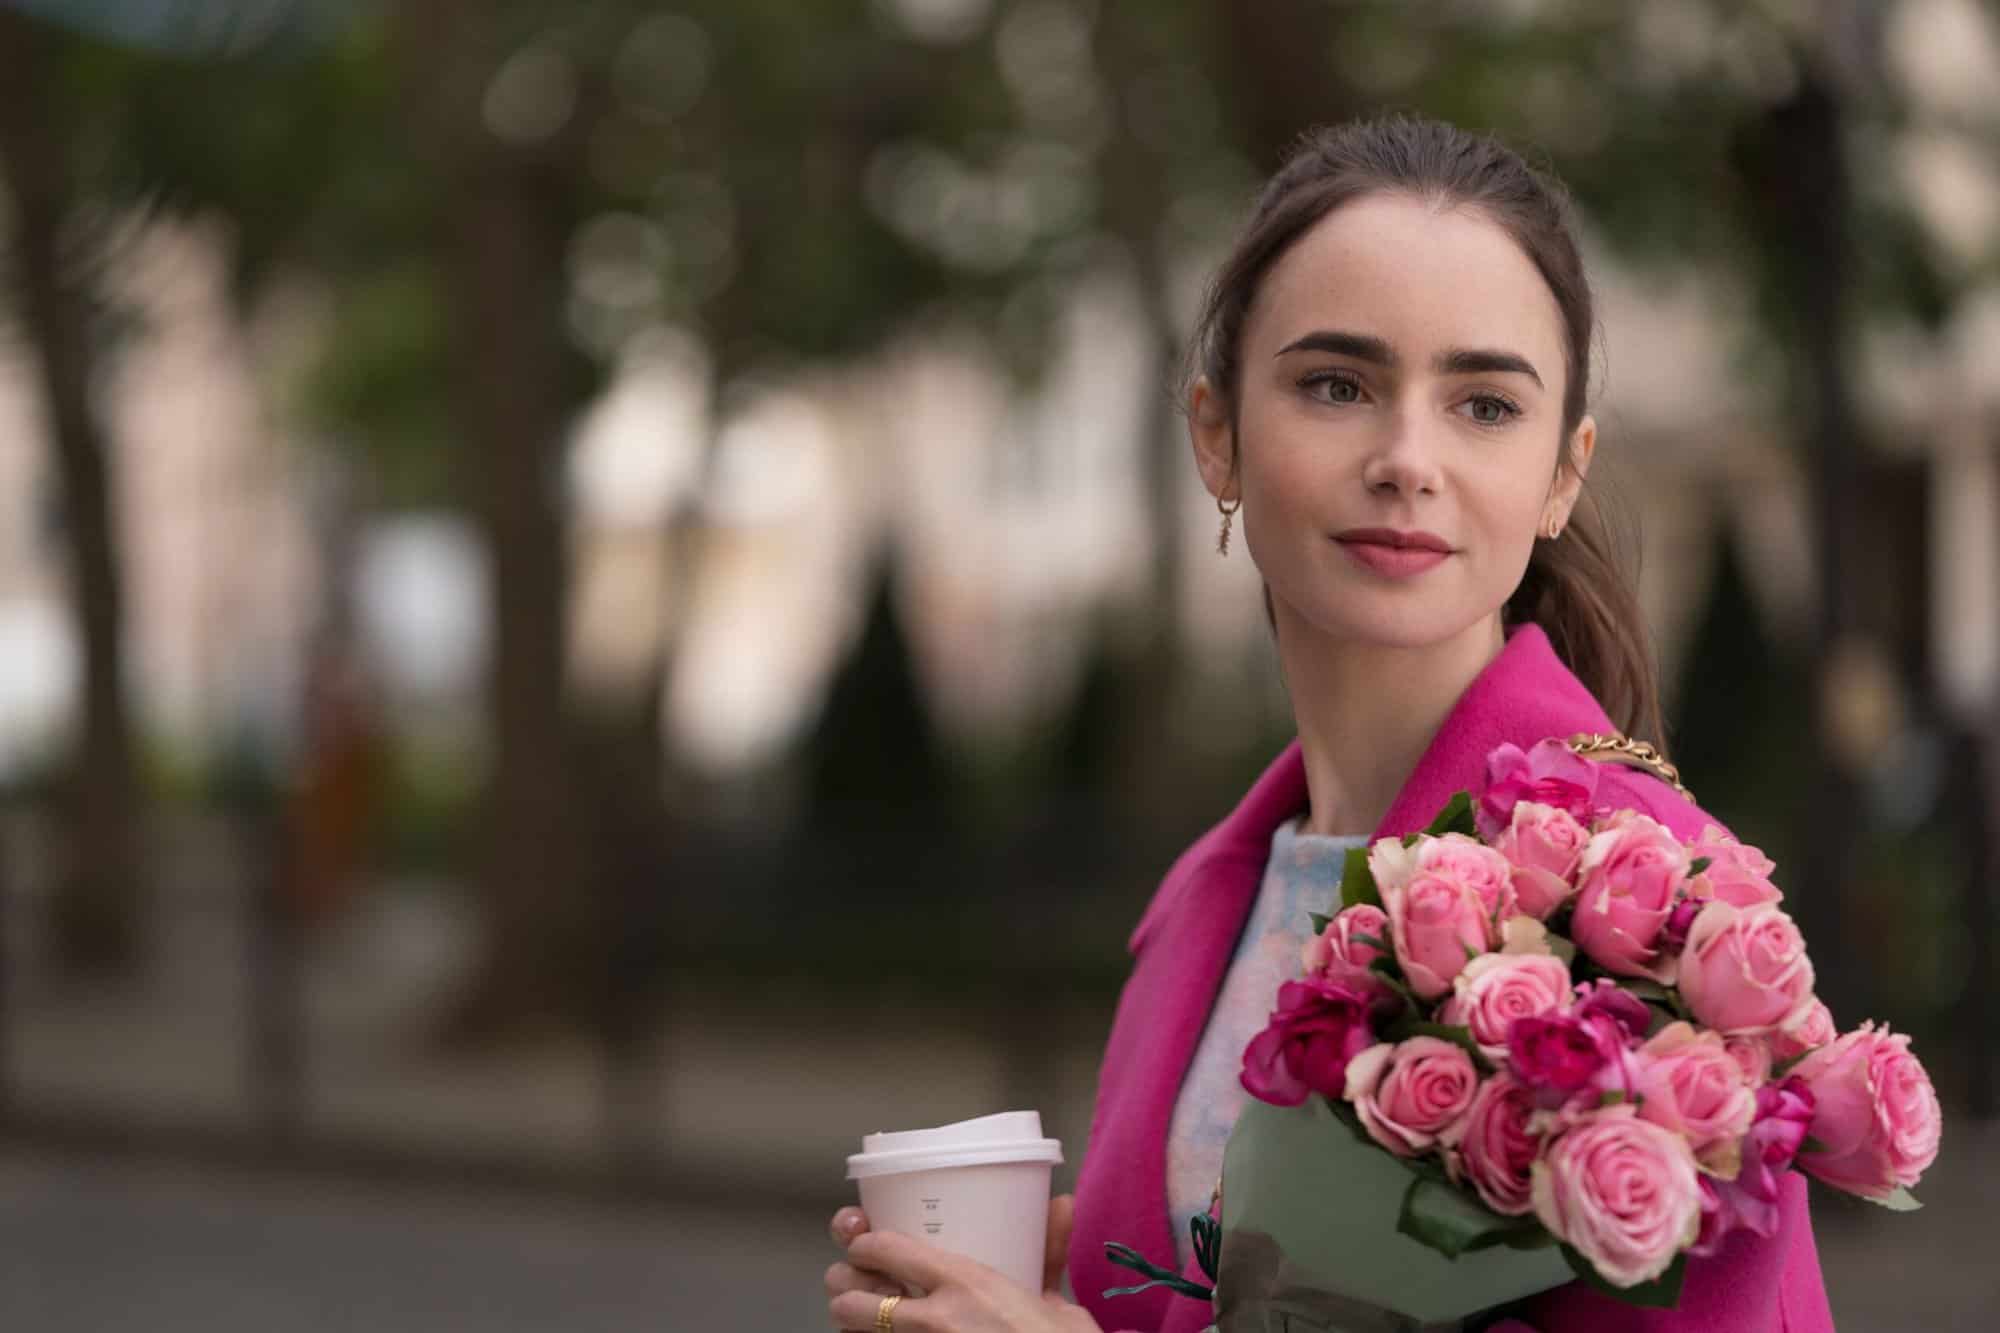 A woman with her hair pulled back wearing a bright pink blazer carrying a bouquet of pink flowers. She is also carrying a cup of coffee to-go and smiling into the distance.